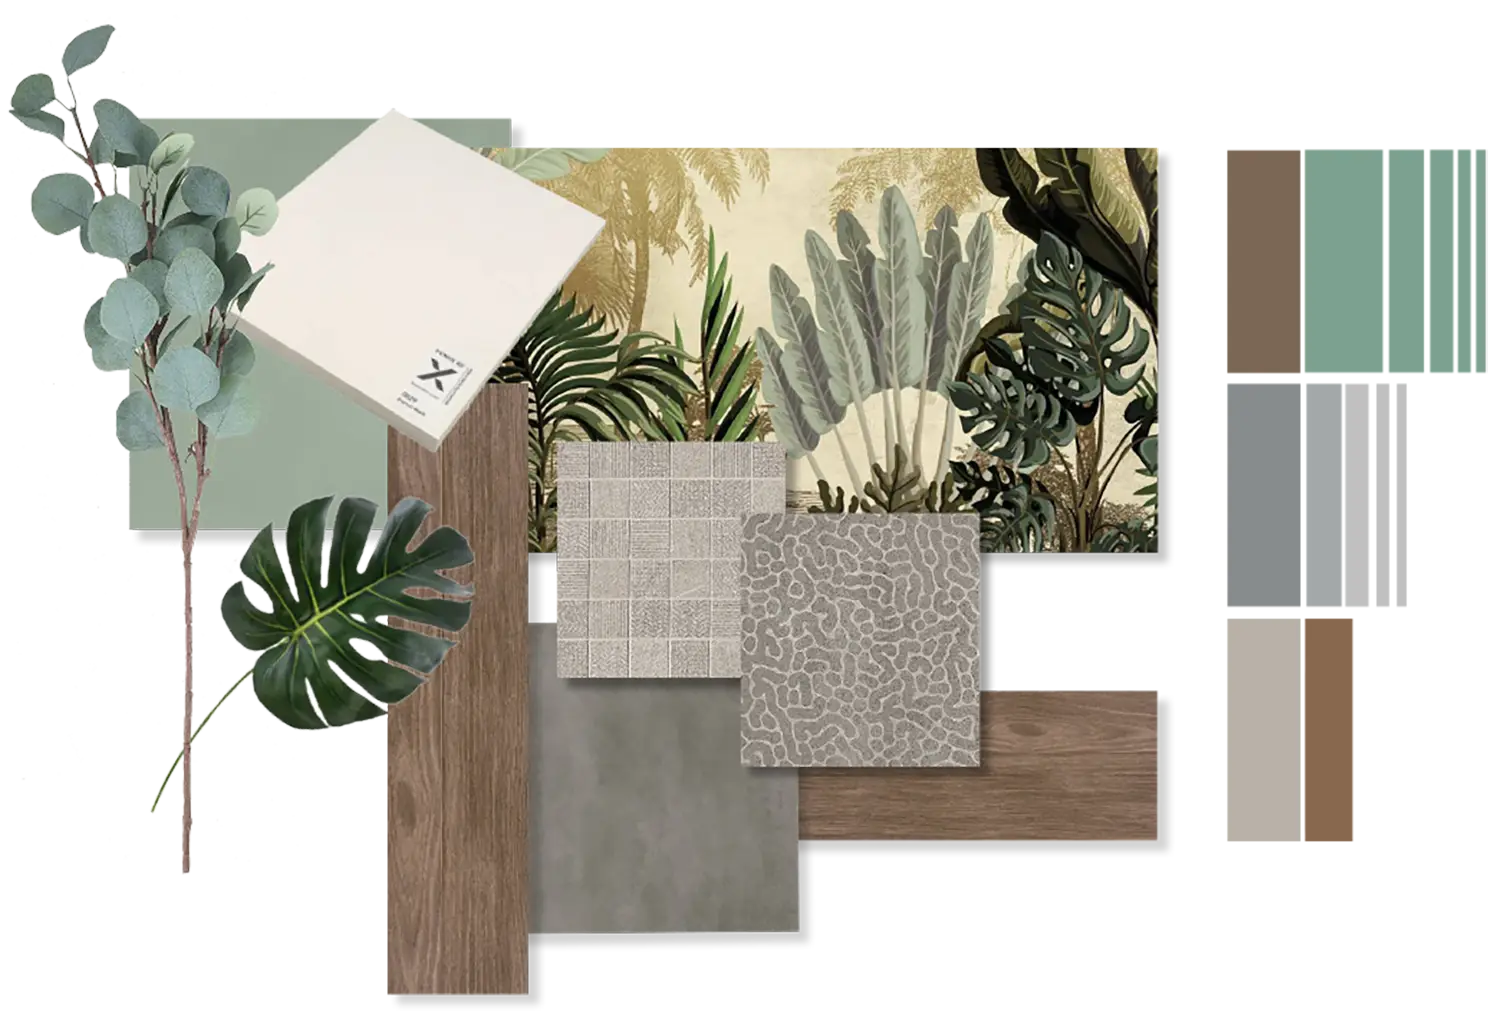 Juxtaposing colors and materials in a moodboard designed by Elles Interior Design studio, leading a renovation project.